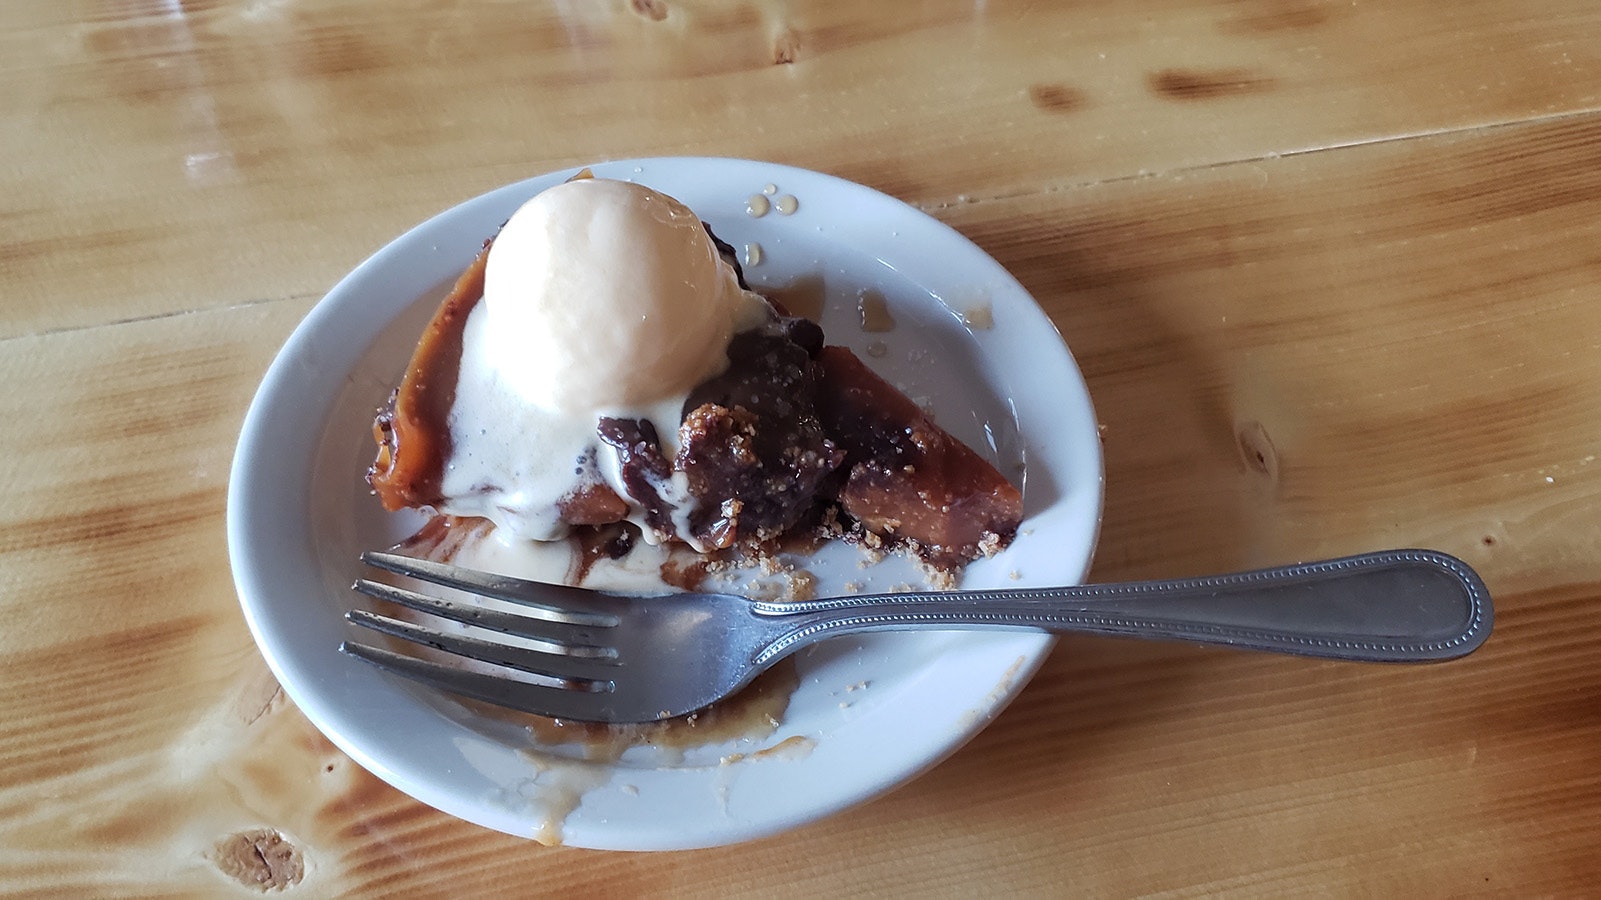 A pecan tart with ice cream served warm.